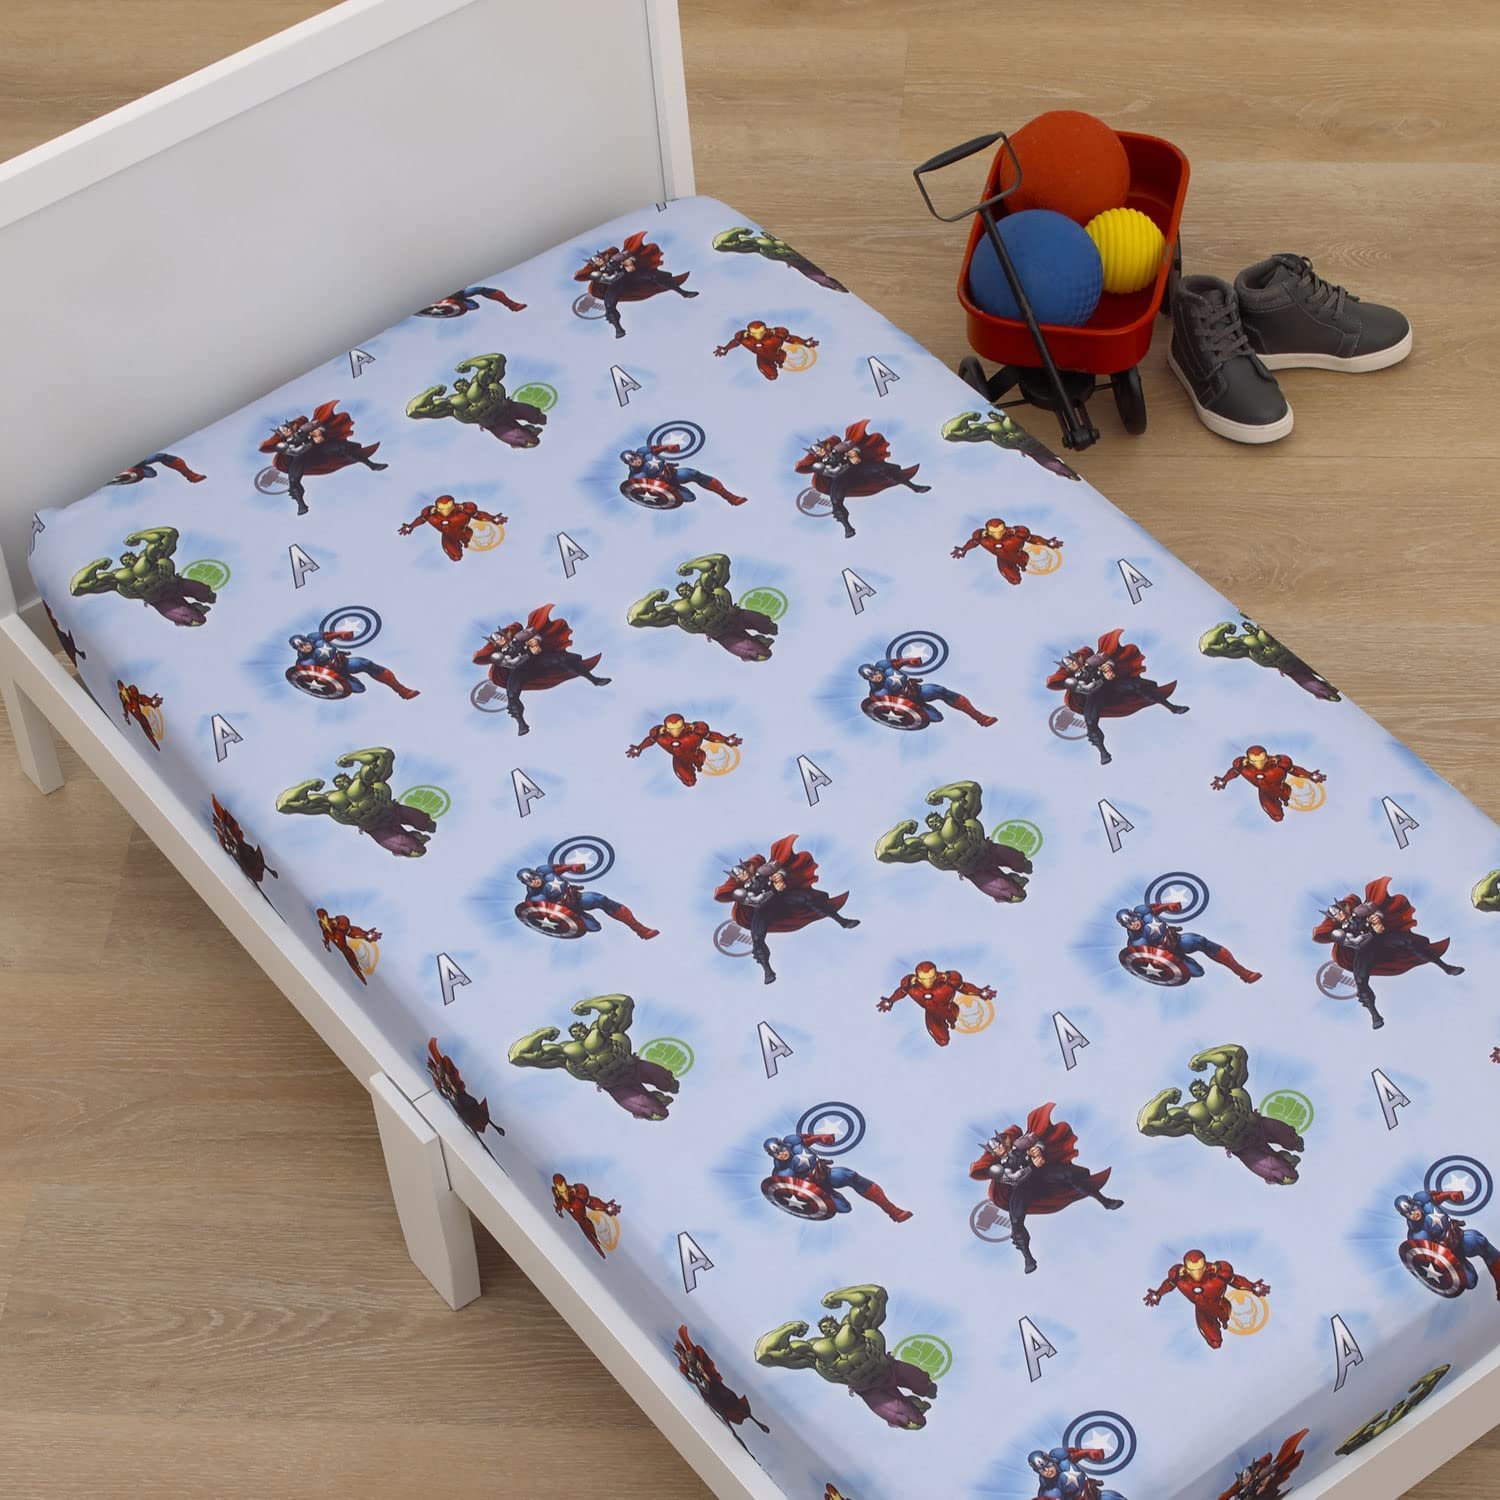 Marvel Avengers Fitted Crib Sheet 100% Soft Microfiber, Baby Sheet, Fits Standard Size Crib Mattress 28in x 52in - image 2 of 4